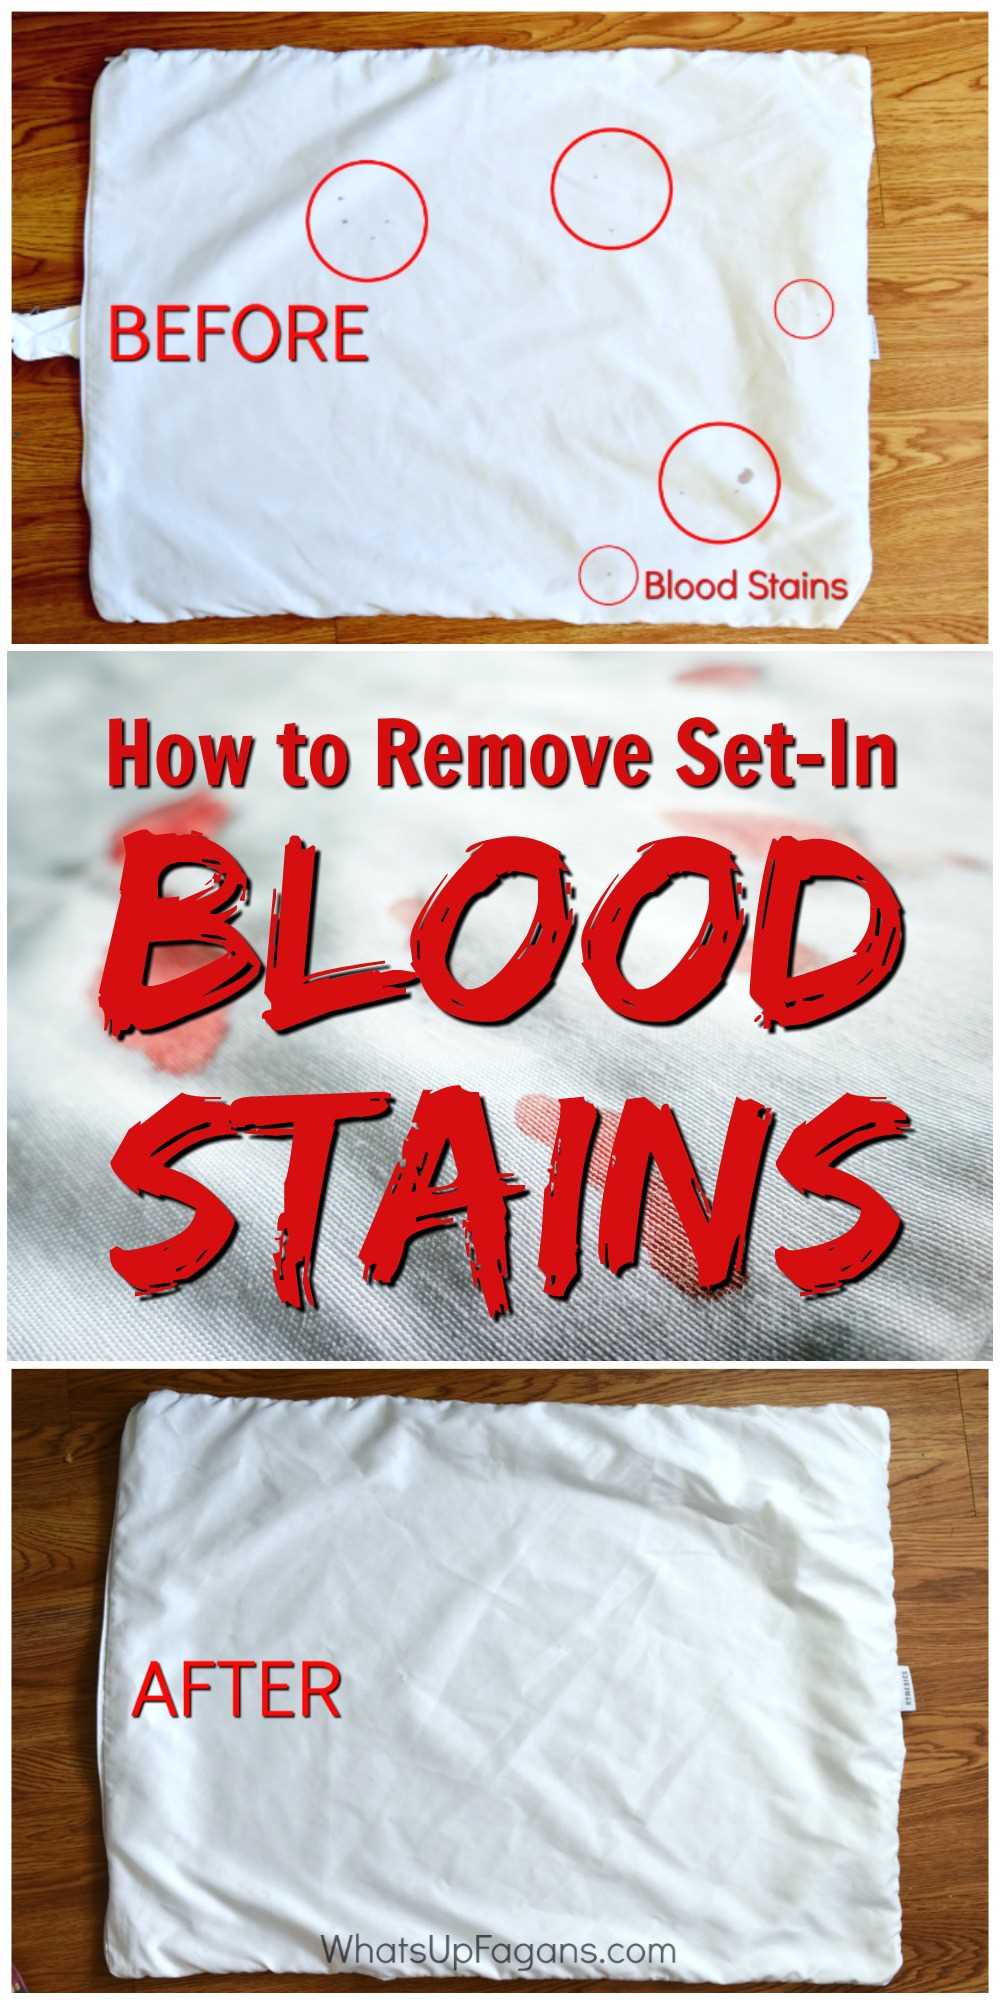 Preventing Future Stains